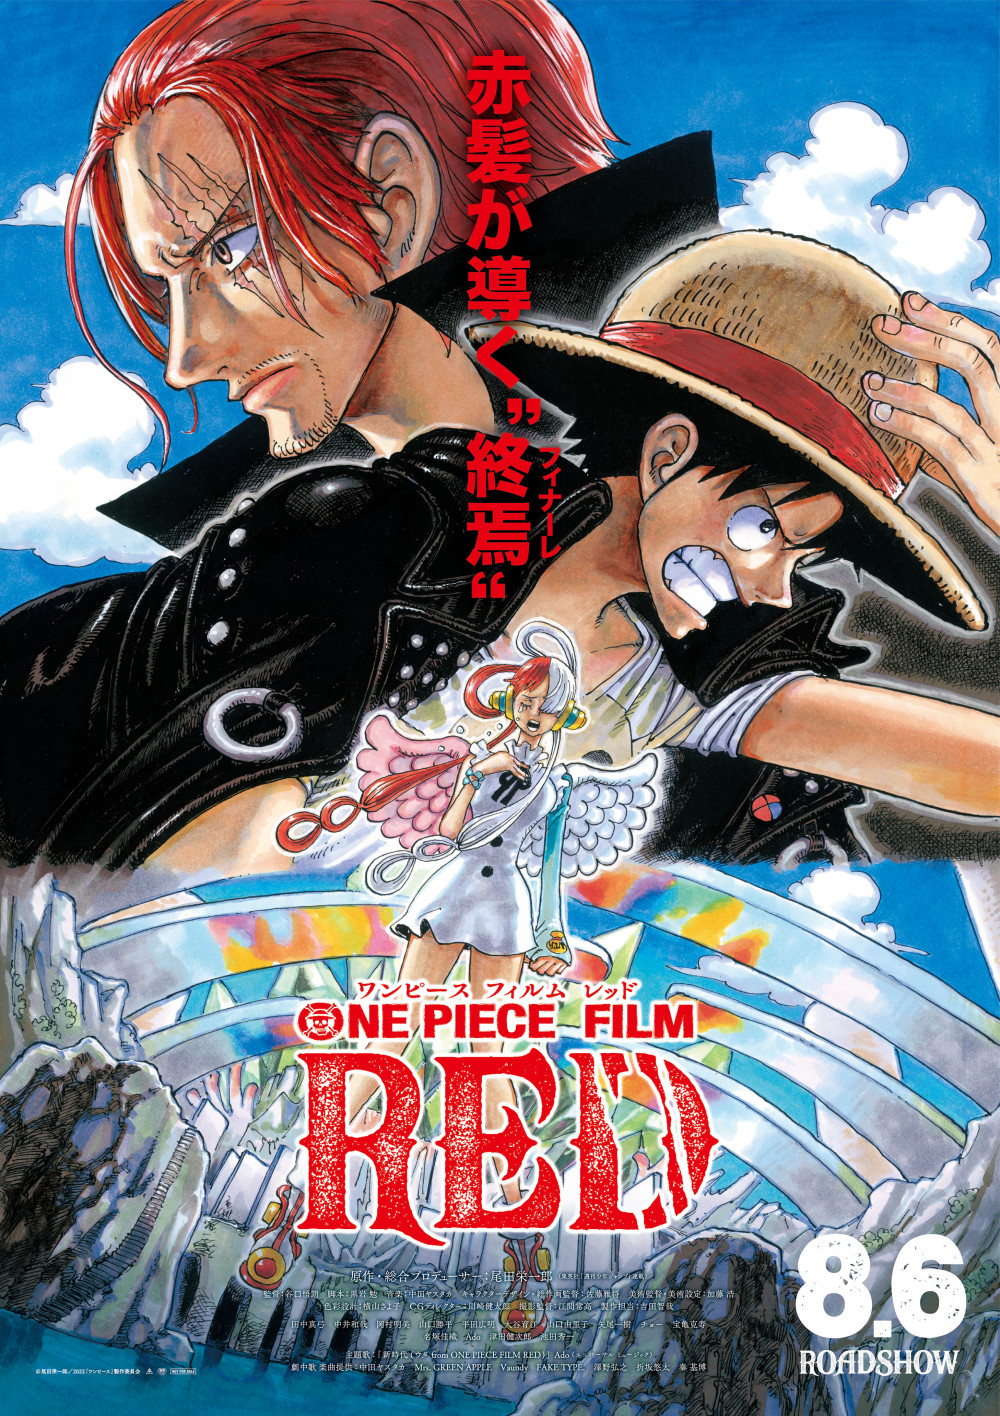 ONE PIECE FILM RED ワンピース フィルムレッド ポスター